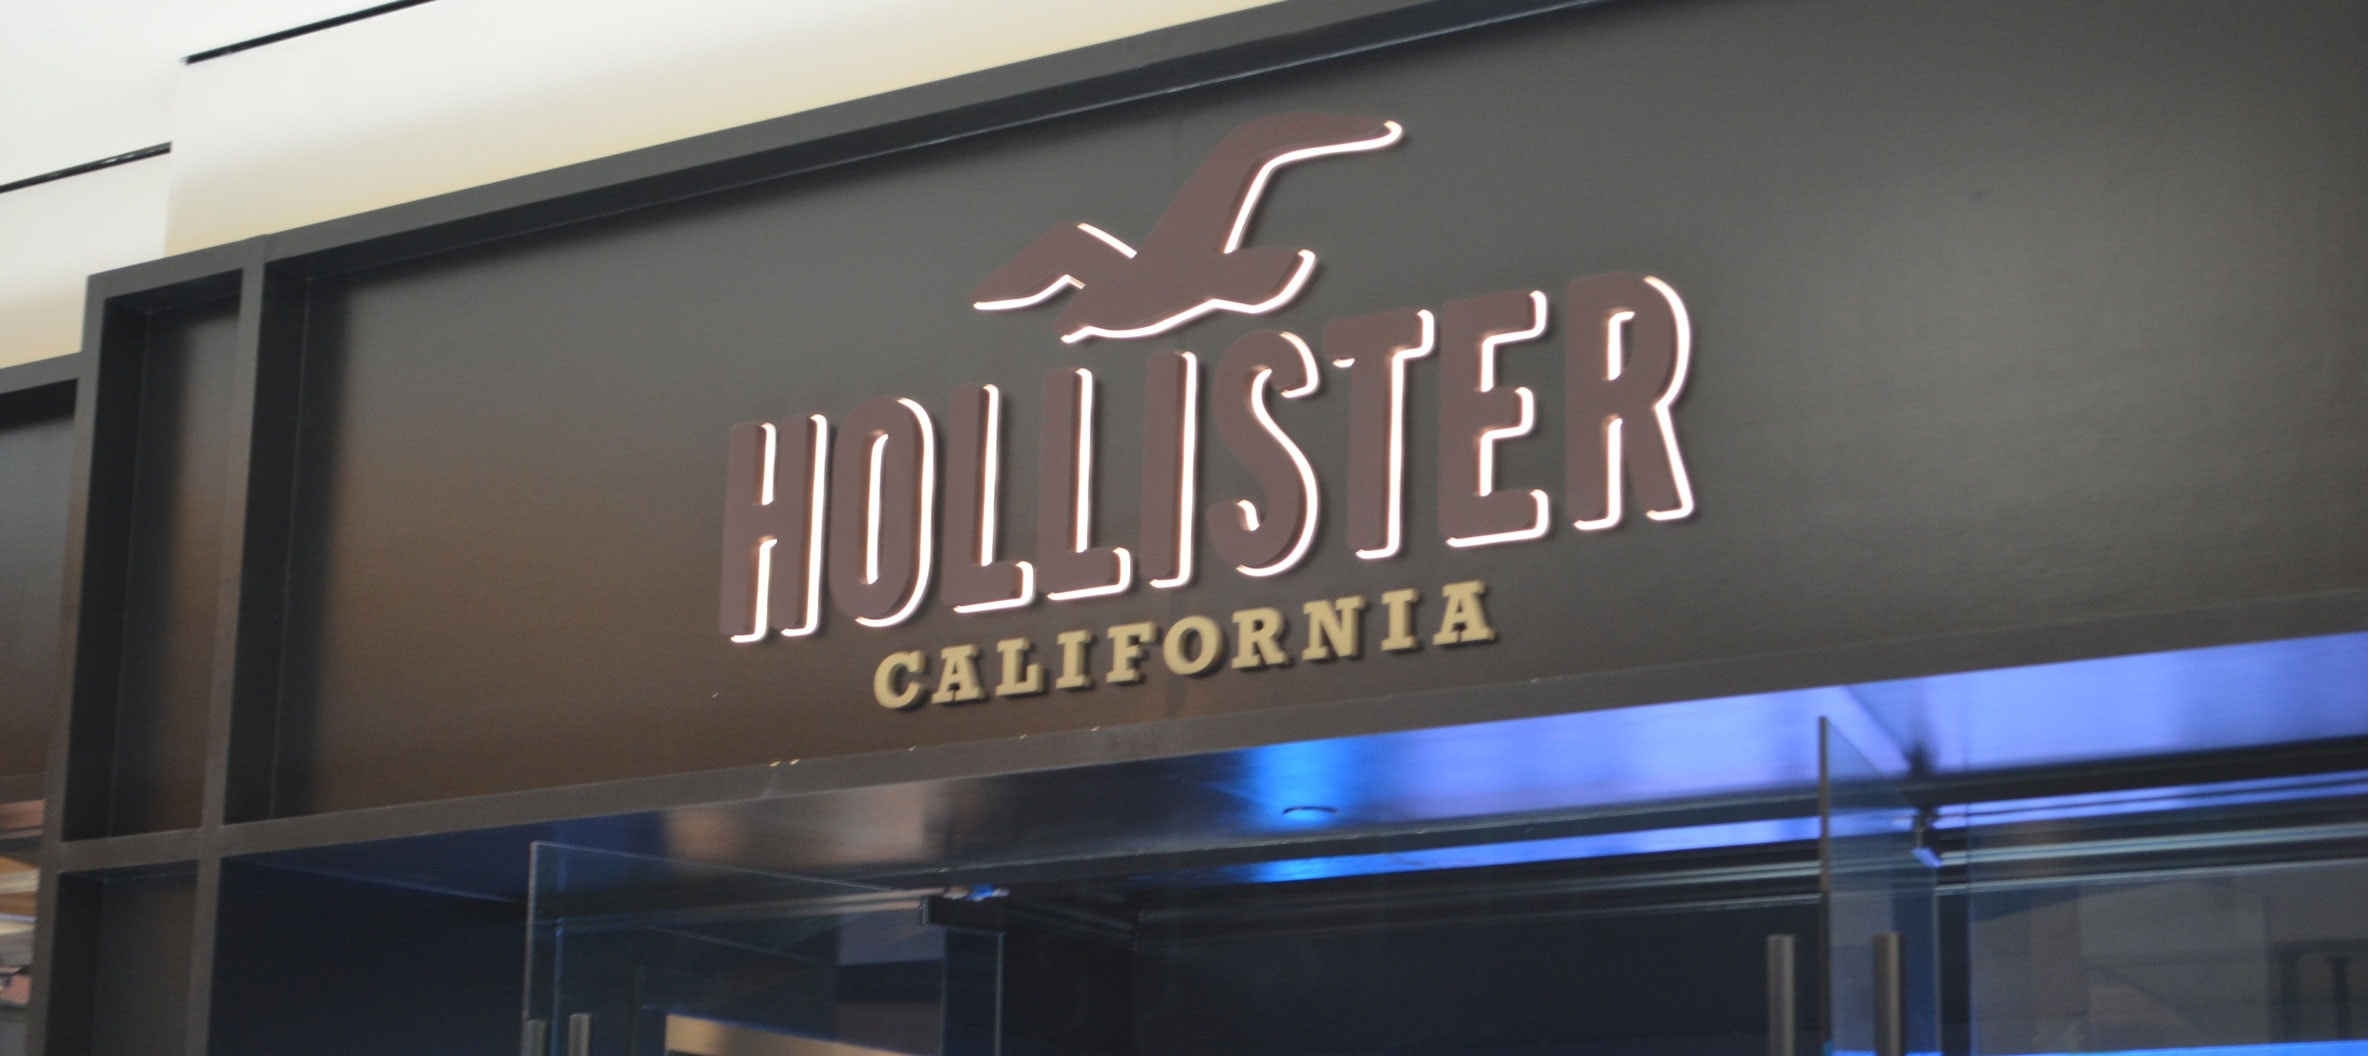 bay plaza hollister Online shopping has 